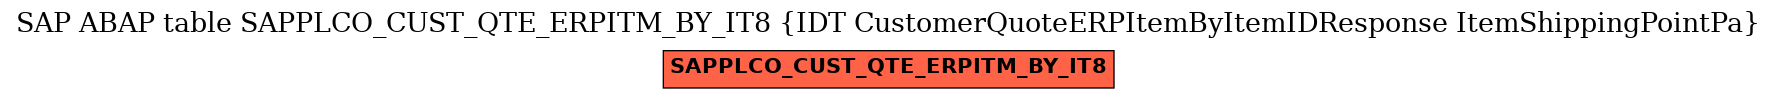 E-R Diagram for table SAPPLCO_CUST_QTE_ERPITM_BY_IT8 (IDT CustomerQuoteERPItemByItemIDResponse ItemShippingPointPa)